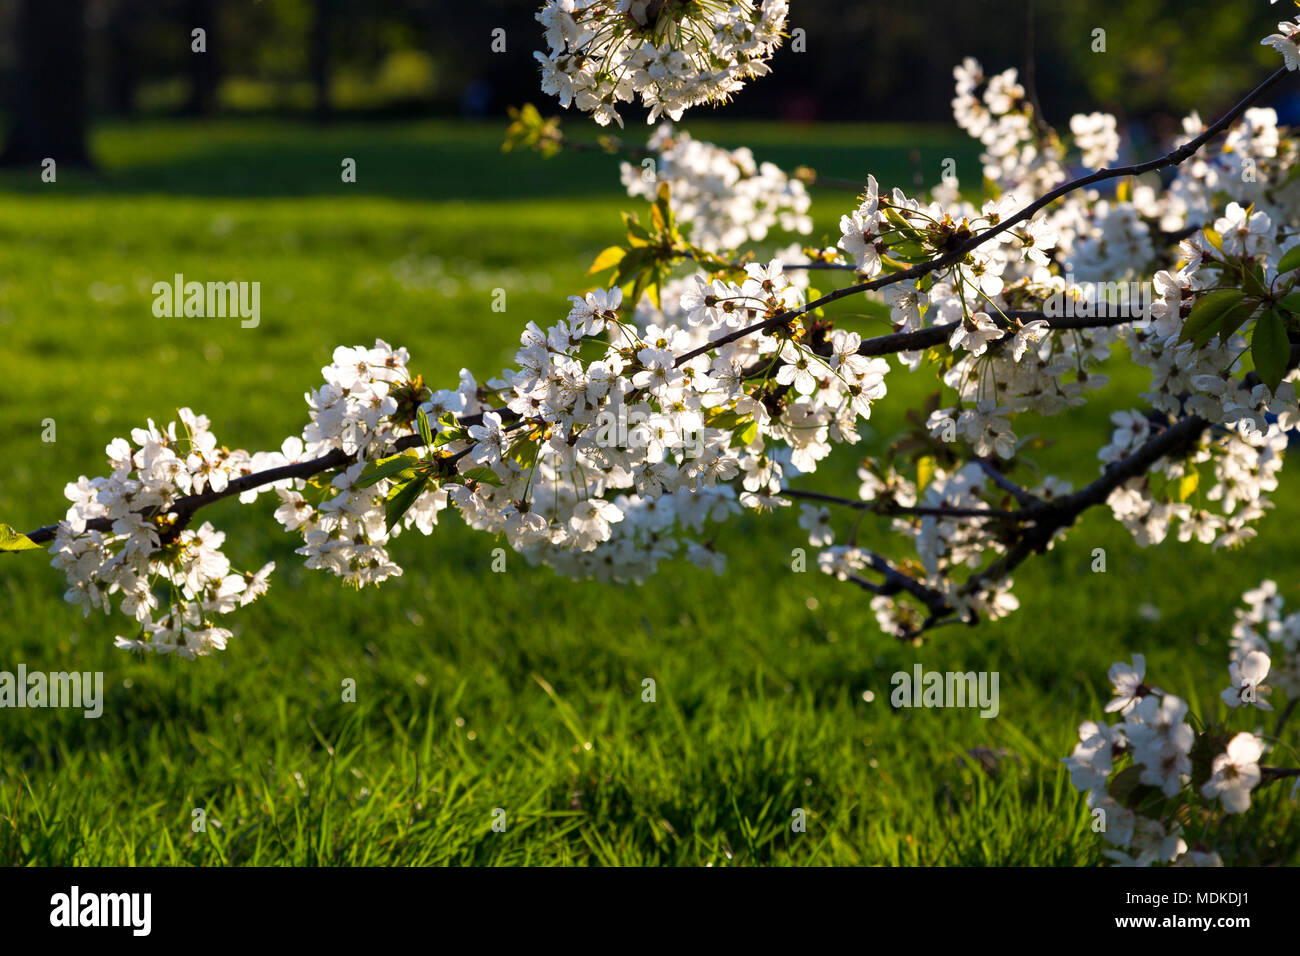 London, UK 19 March 2018 - White blossoming tree branch in Hyde Park, London experiences a heatwave, the hottest April day in 70 years Stock Photo